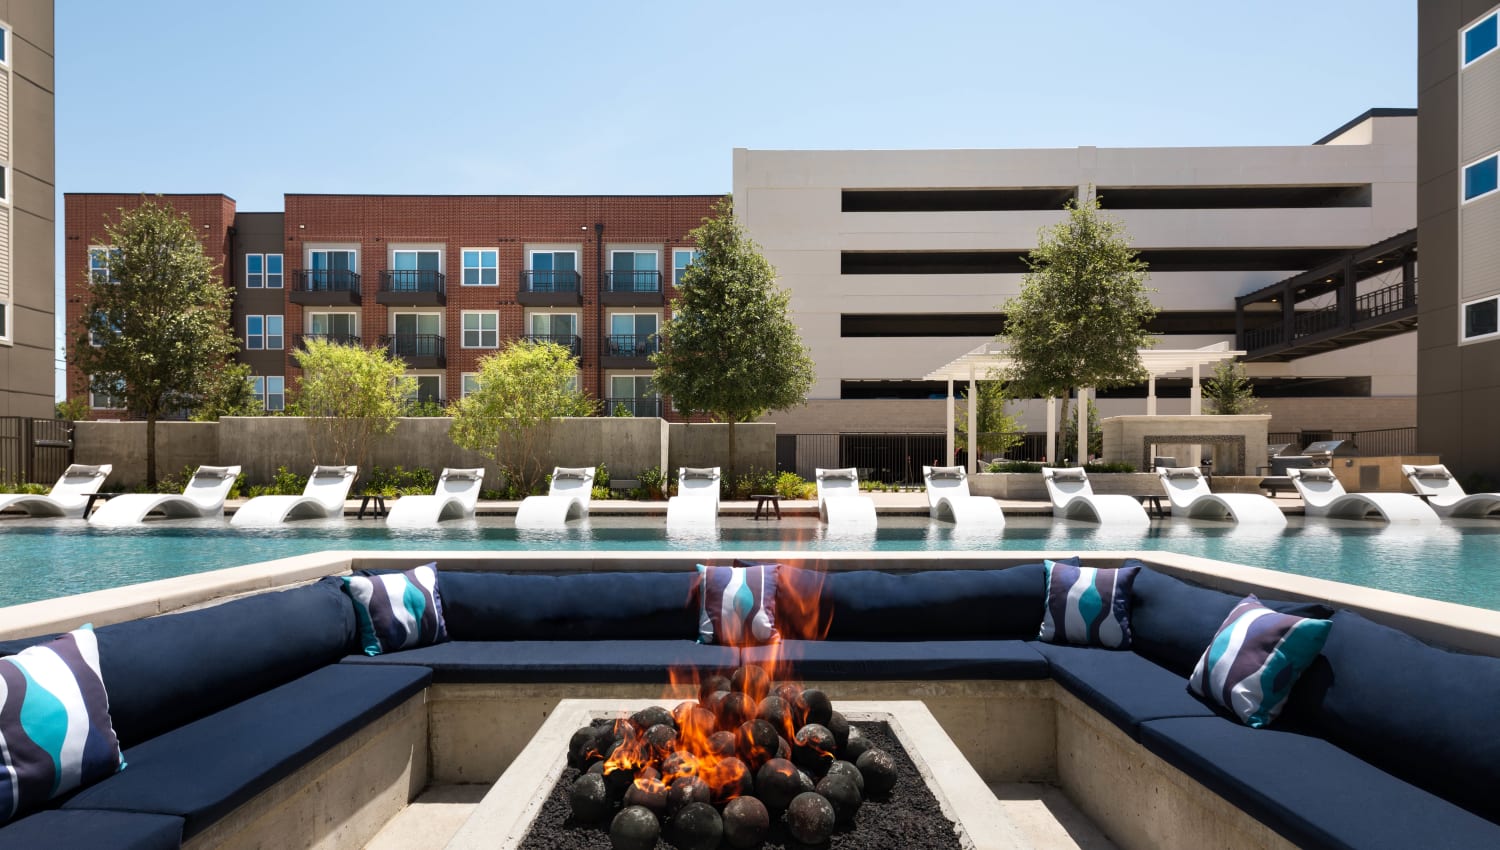 Fire pit lounge at Lux on Main in Carrollton, Texas